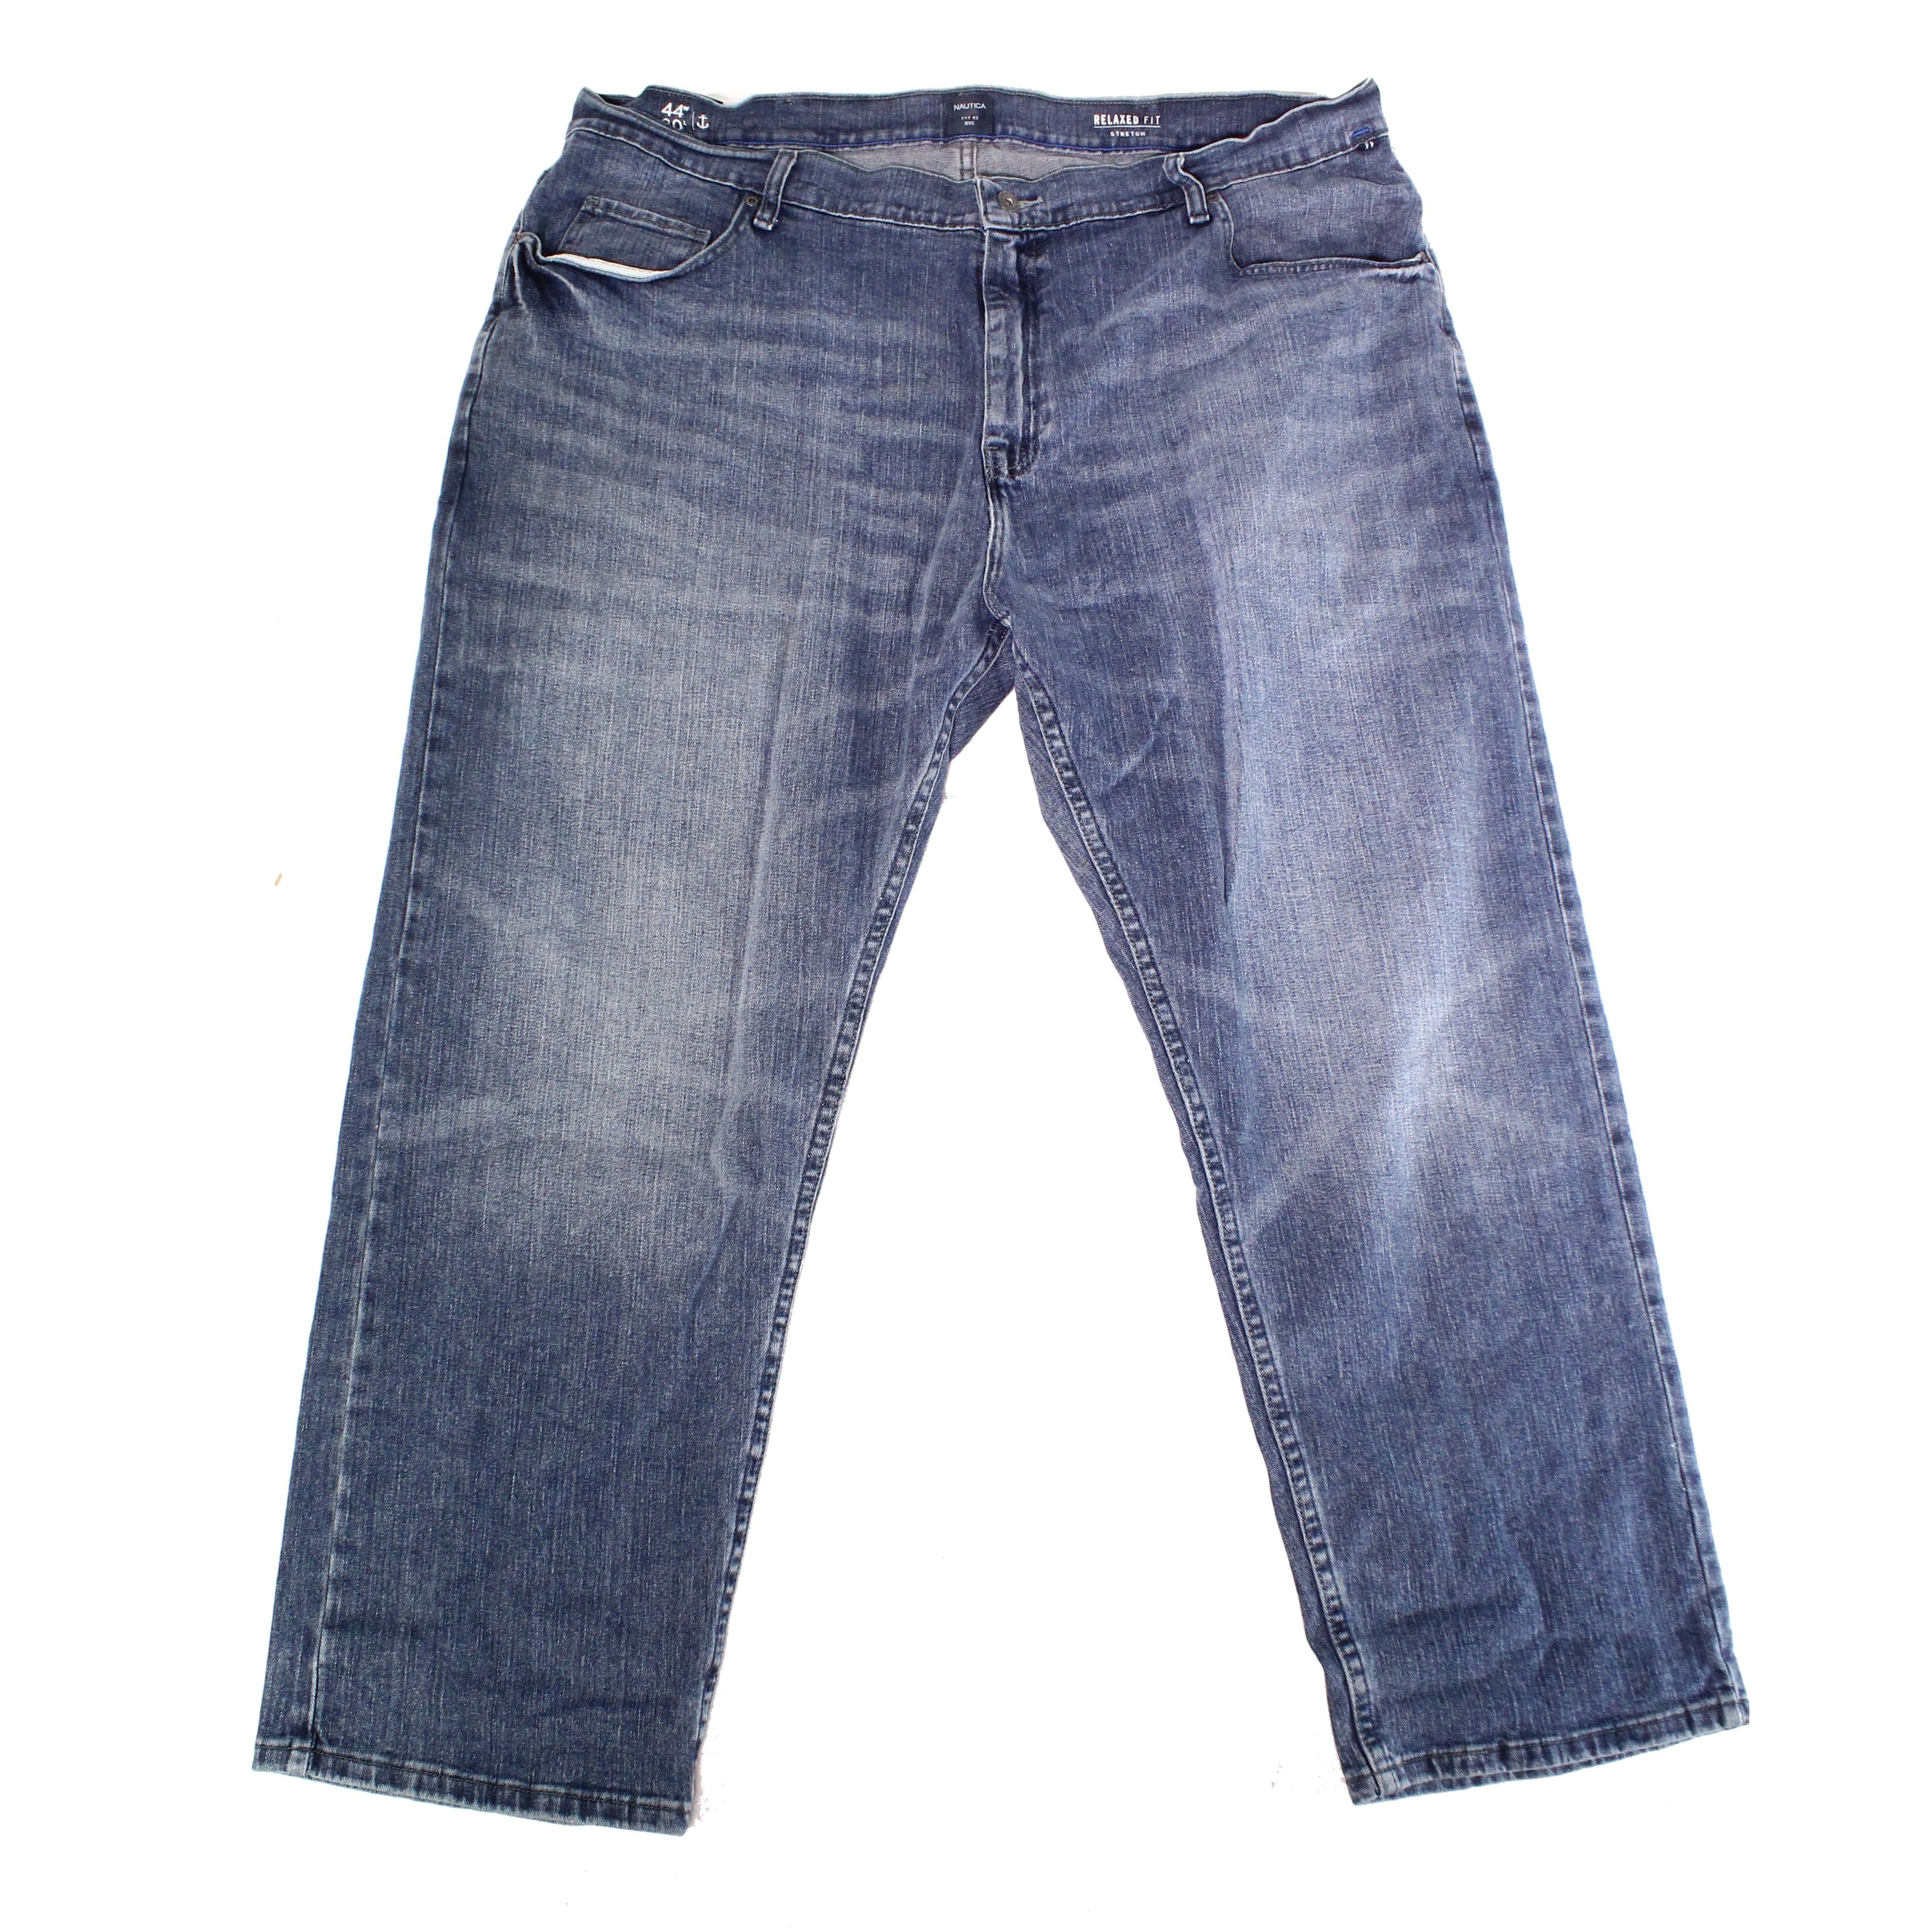 44x30 jeans